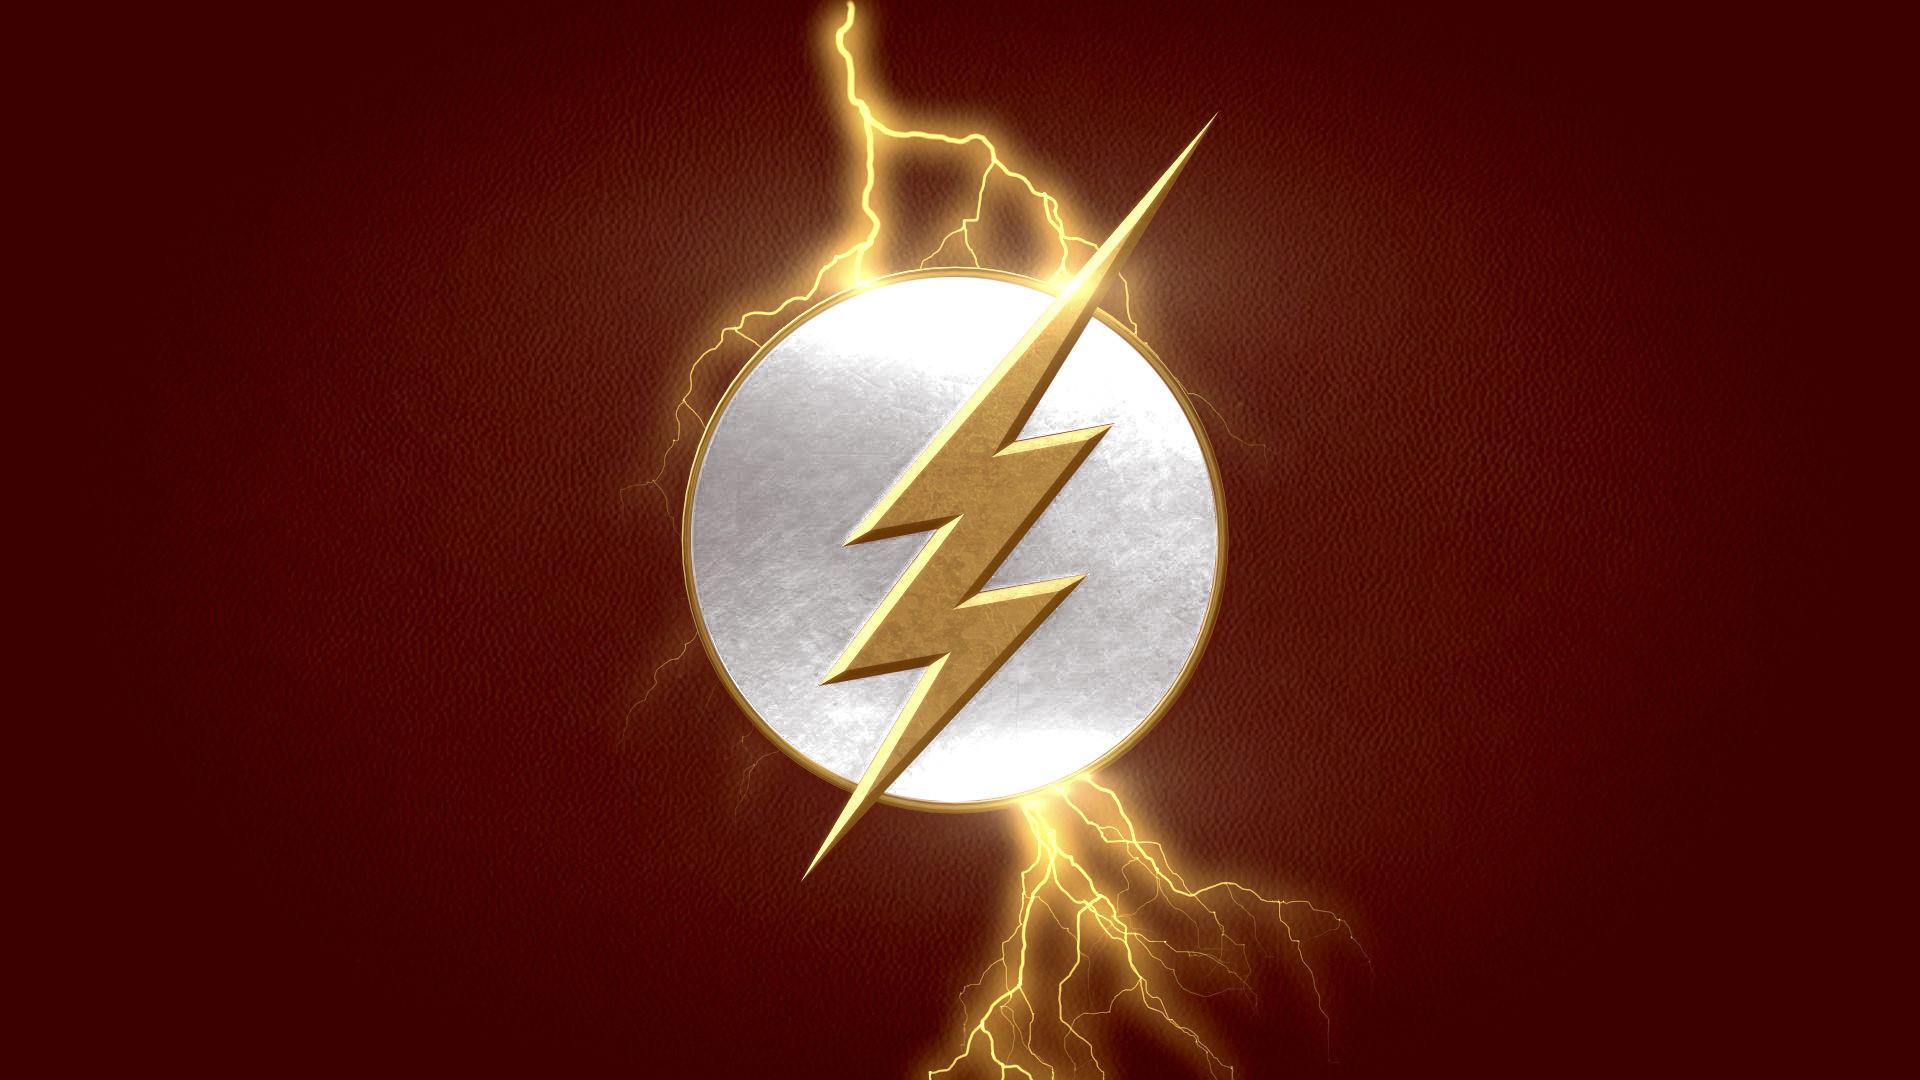 Flash Wallpaper (the best image in 2018)